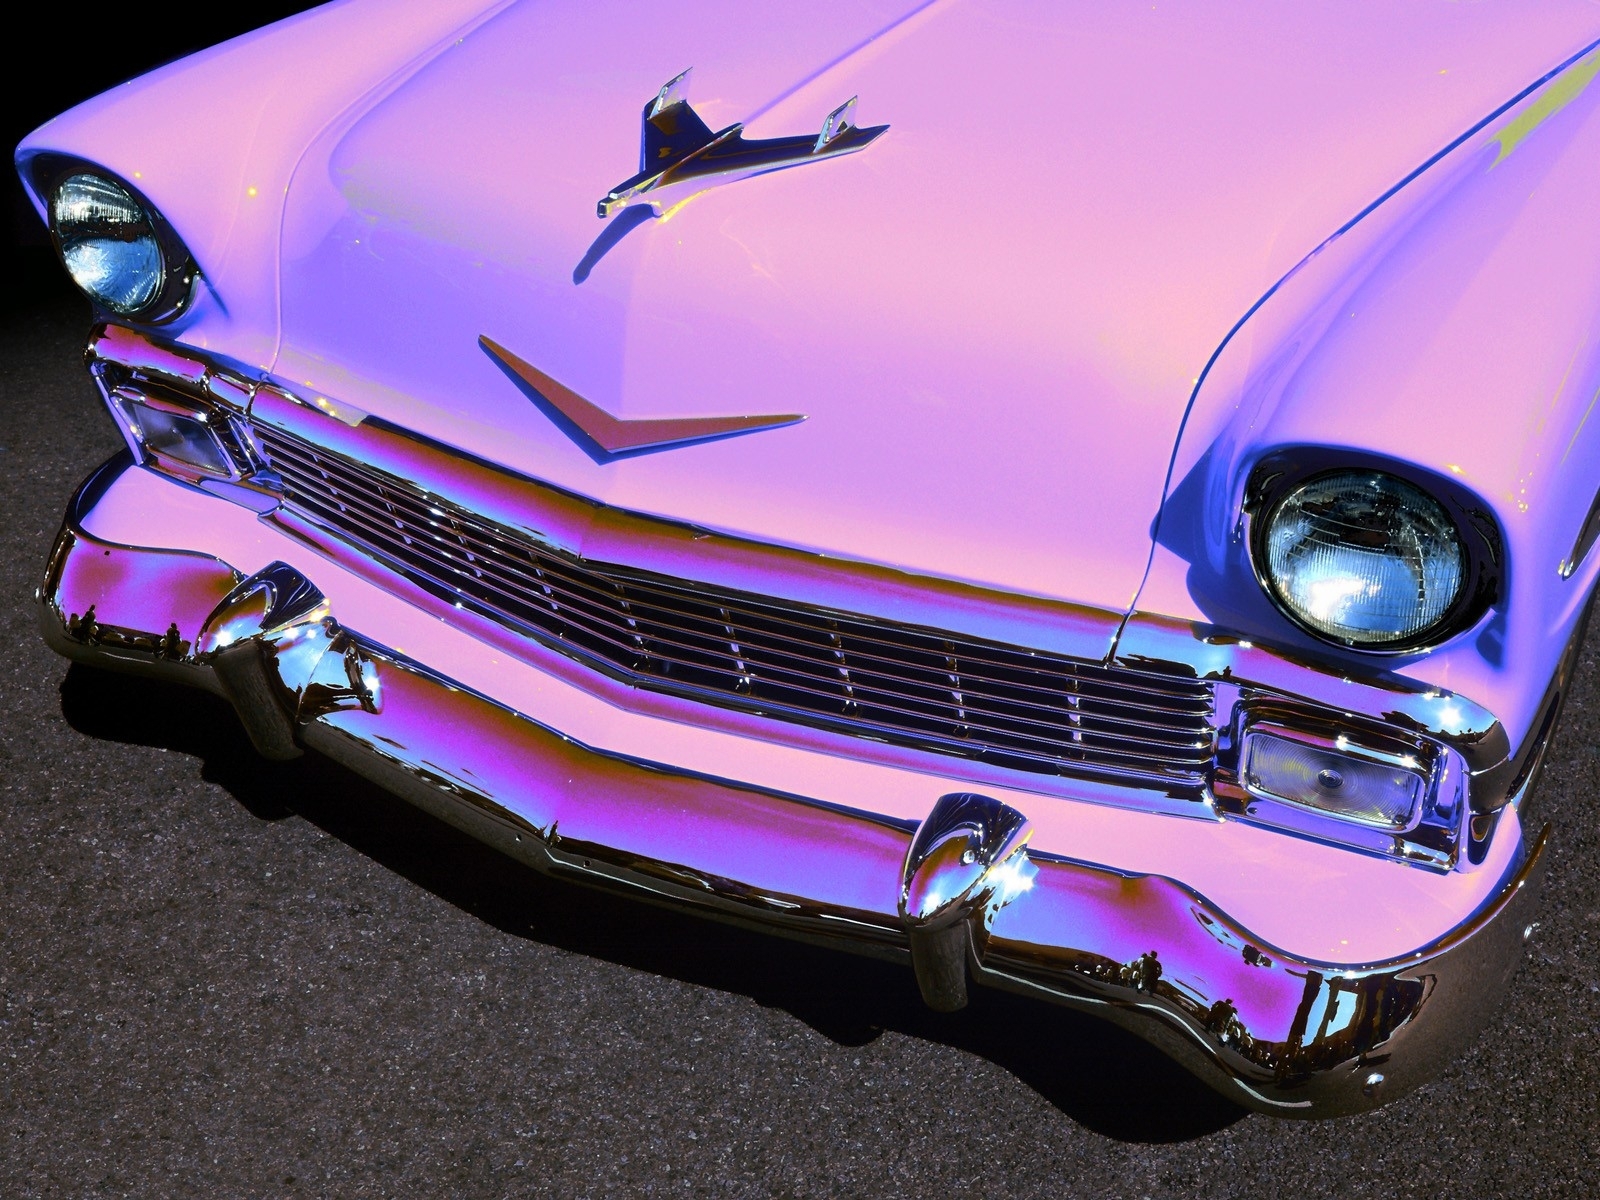 cadillac, Vehicles, Cars, Pink, Classic, Retro, Chrome Wallpapers HD / Desk...